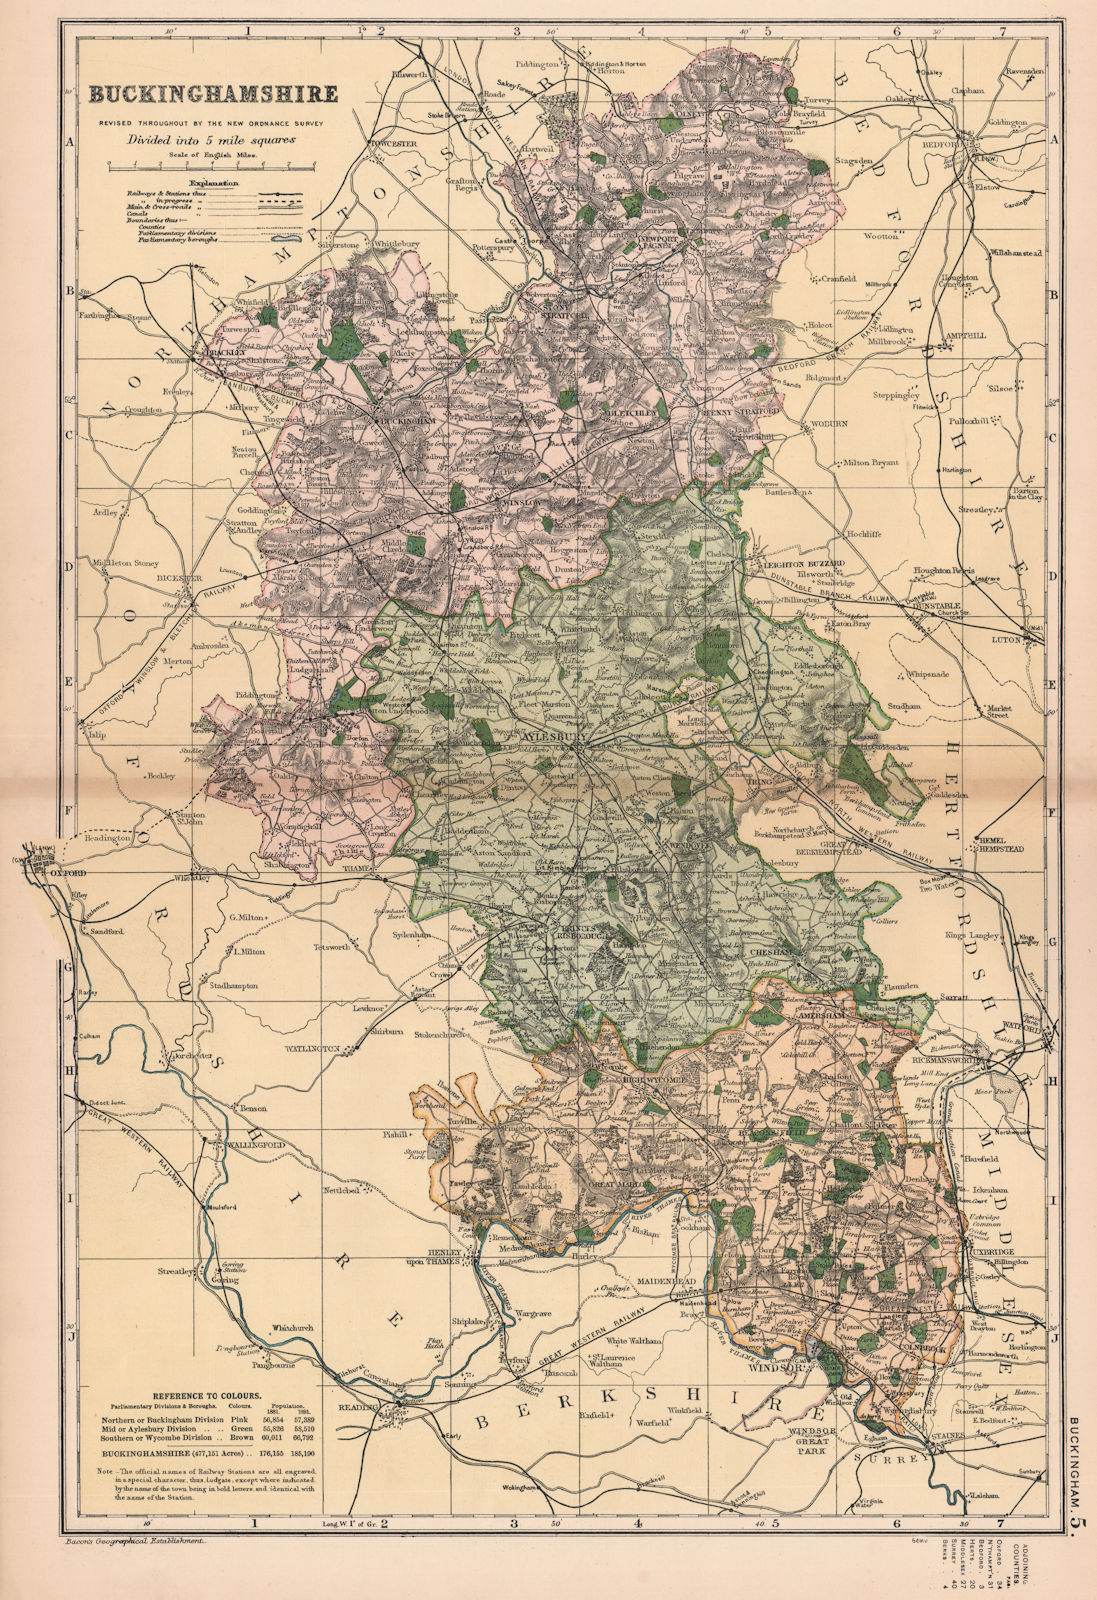 Associate Product BUCKINGHAMSHIRE. Showing Parliamentary divisions,boroughs & parks.BACON 1901 map